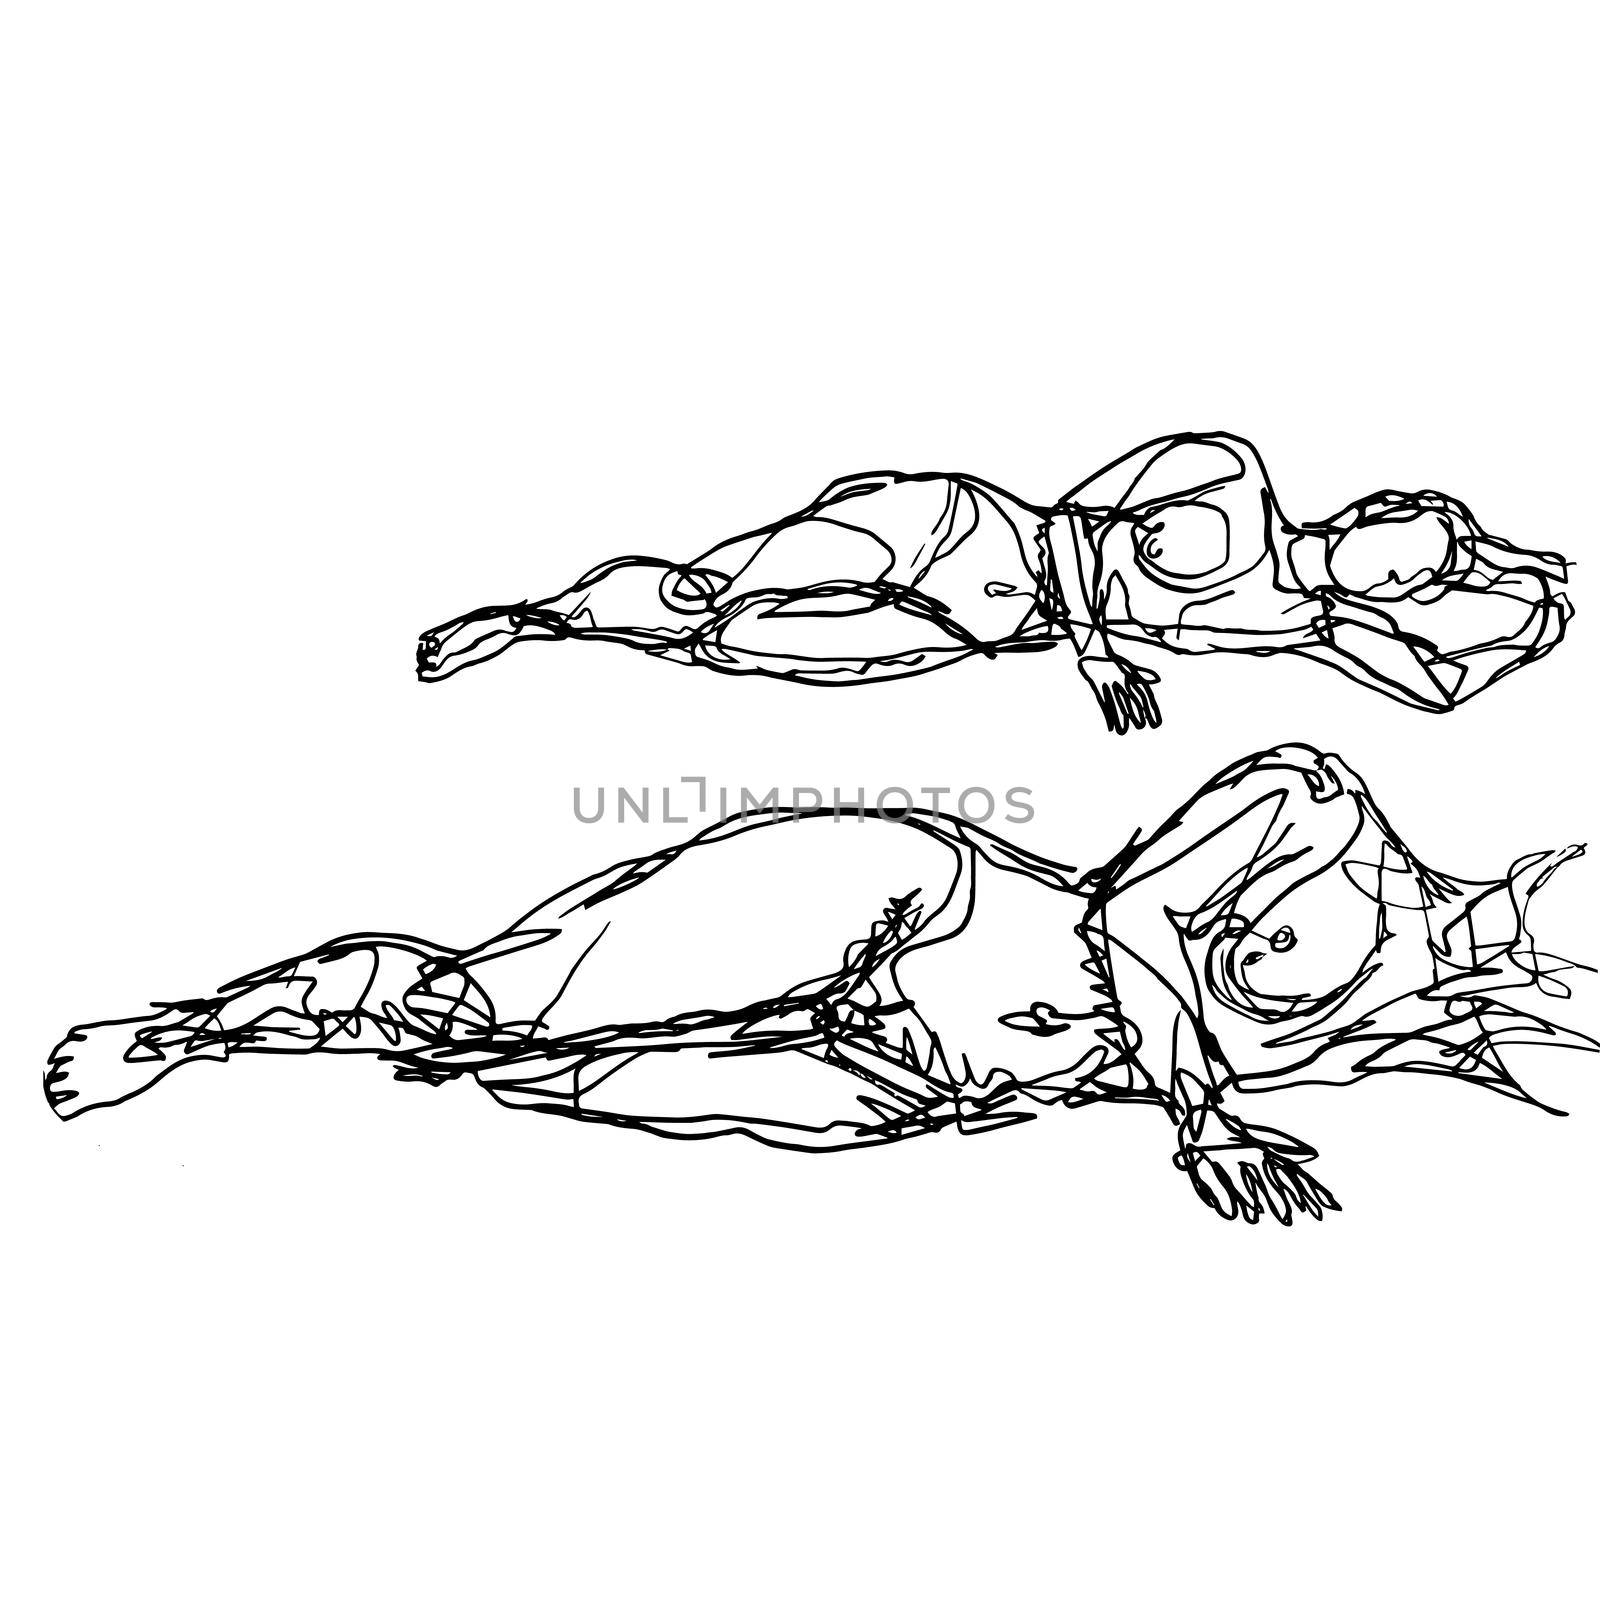 Nude Female Human Figure Model Posing Reclining; Supine Pose or Lying Down Doodle Art Continuous Line Drawing by patrimonio